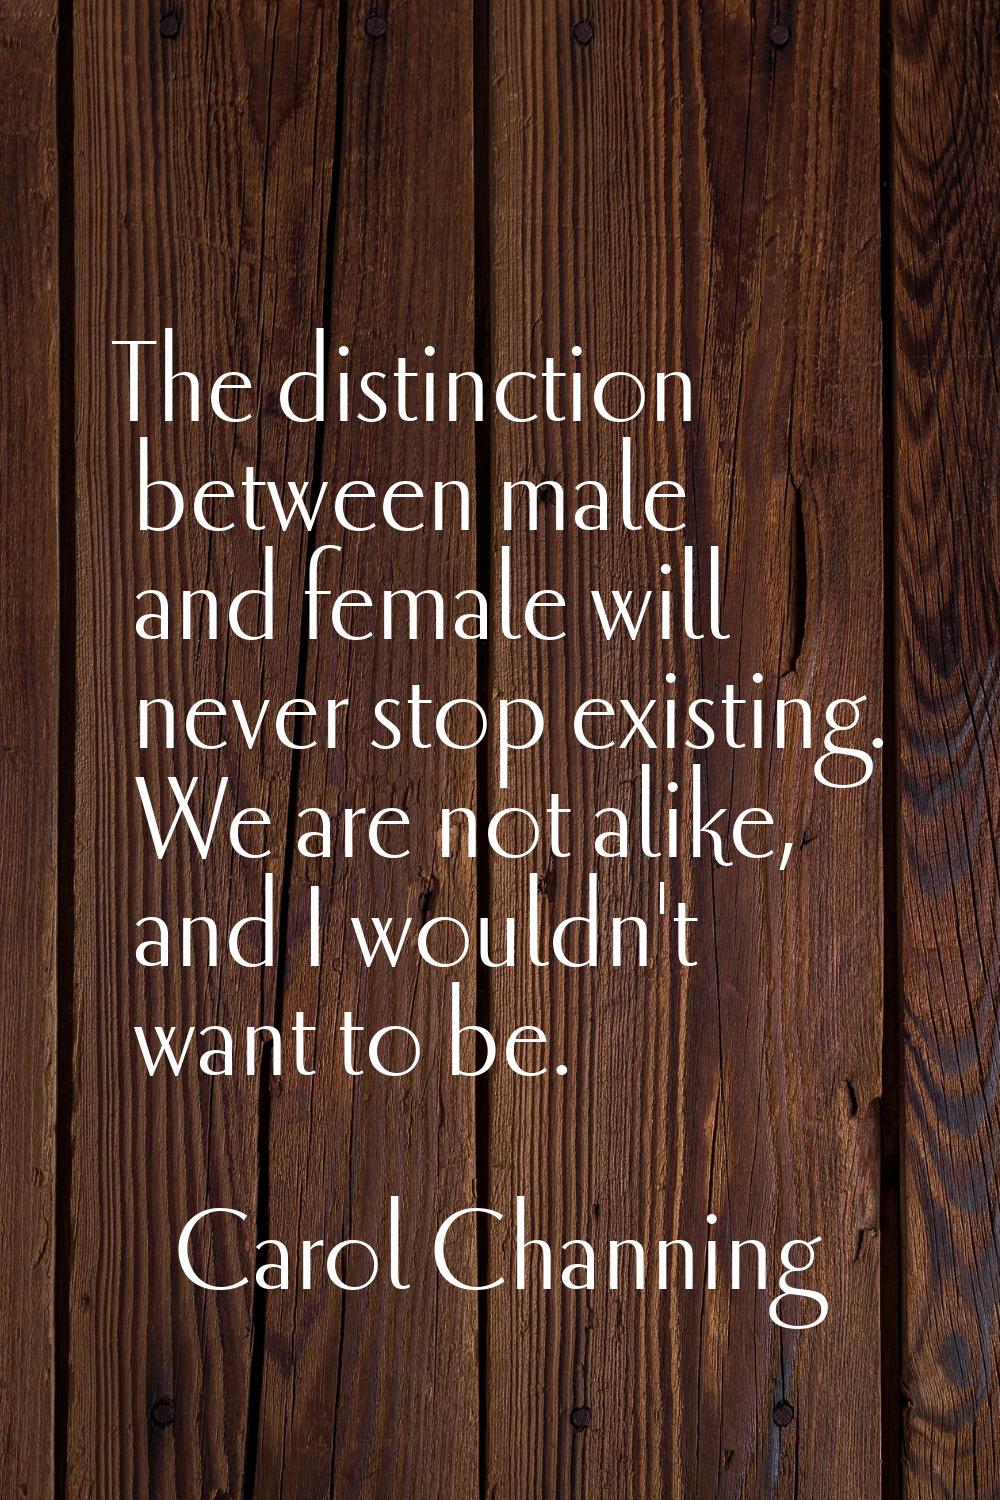 The distinction between male and female will never stop existing. We are not alike, and I wouldn't 